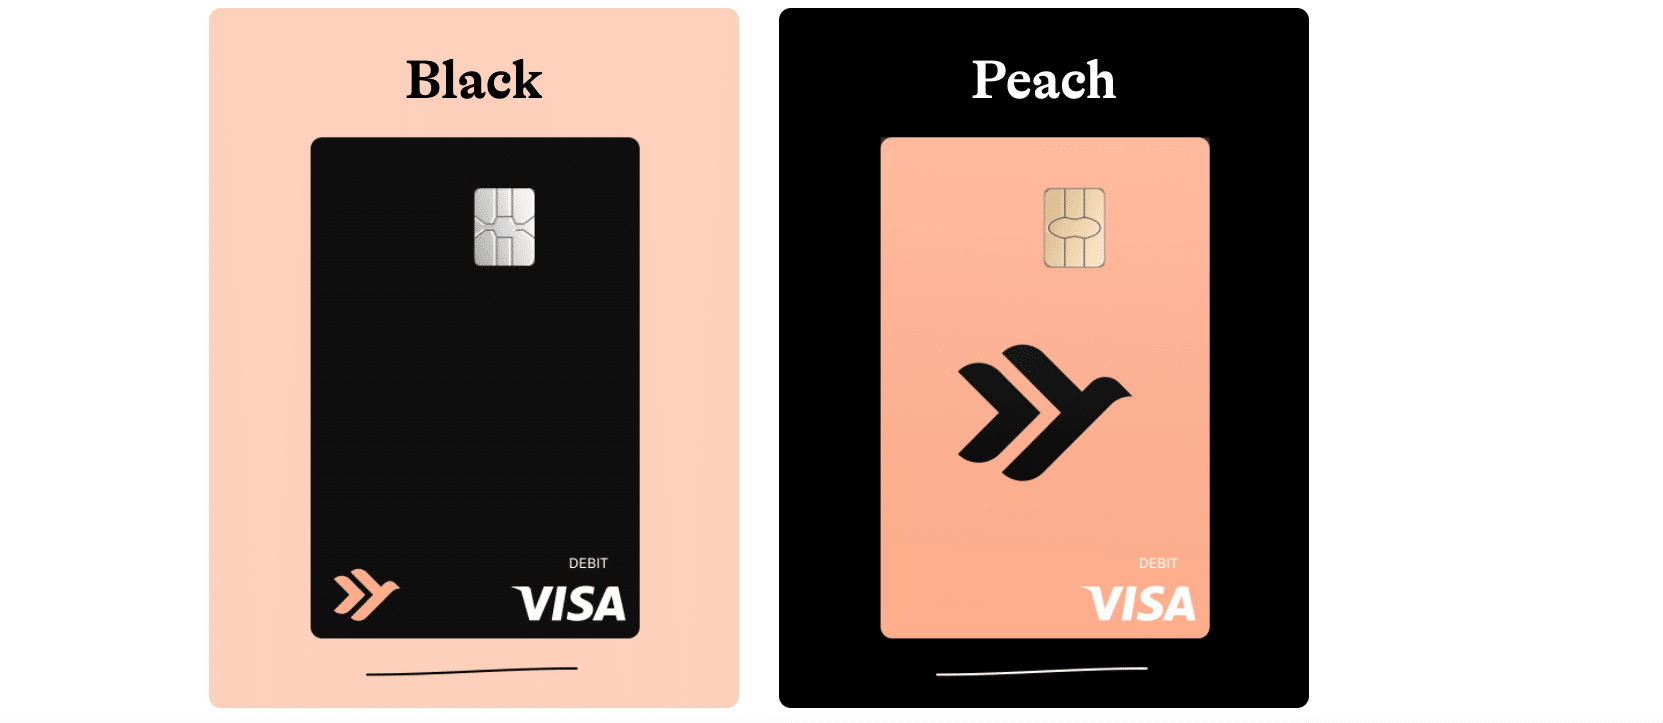 Empower Your Finances with the BankBlack® Card